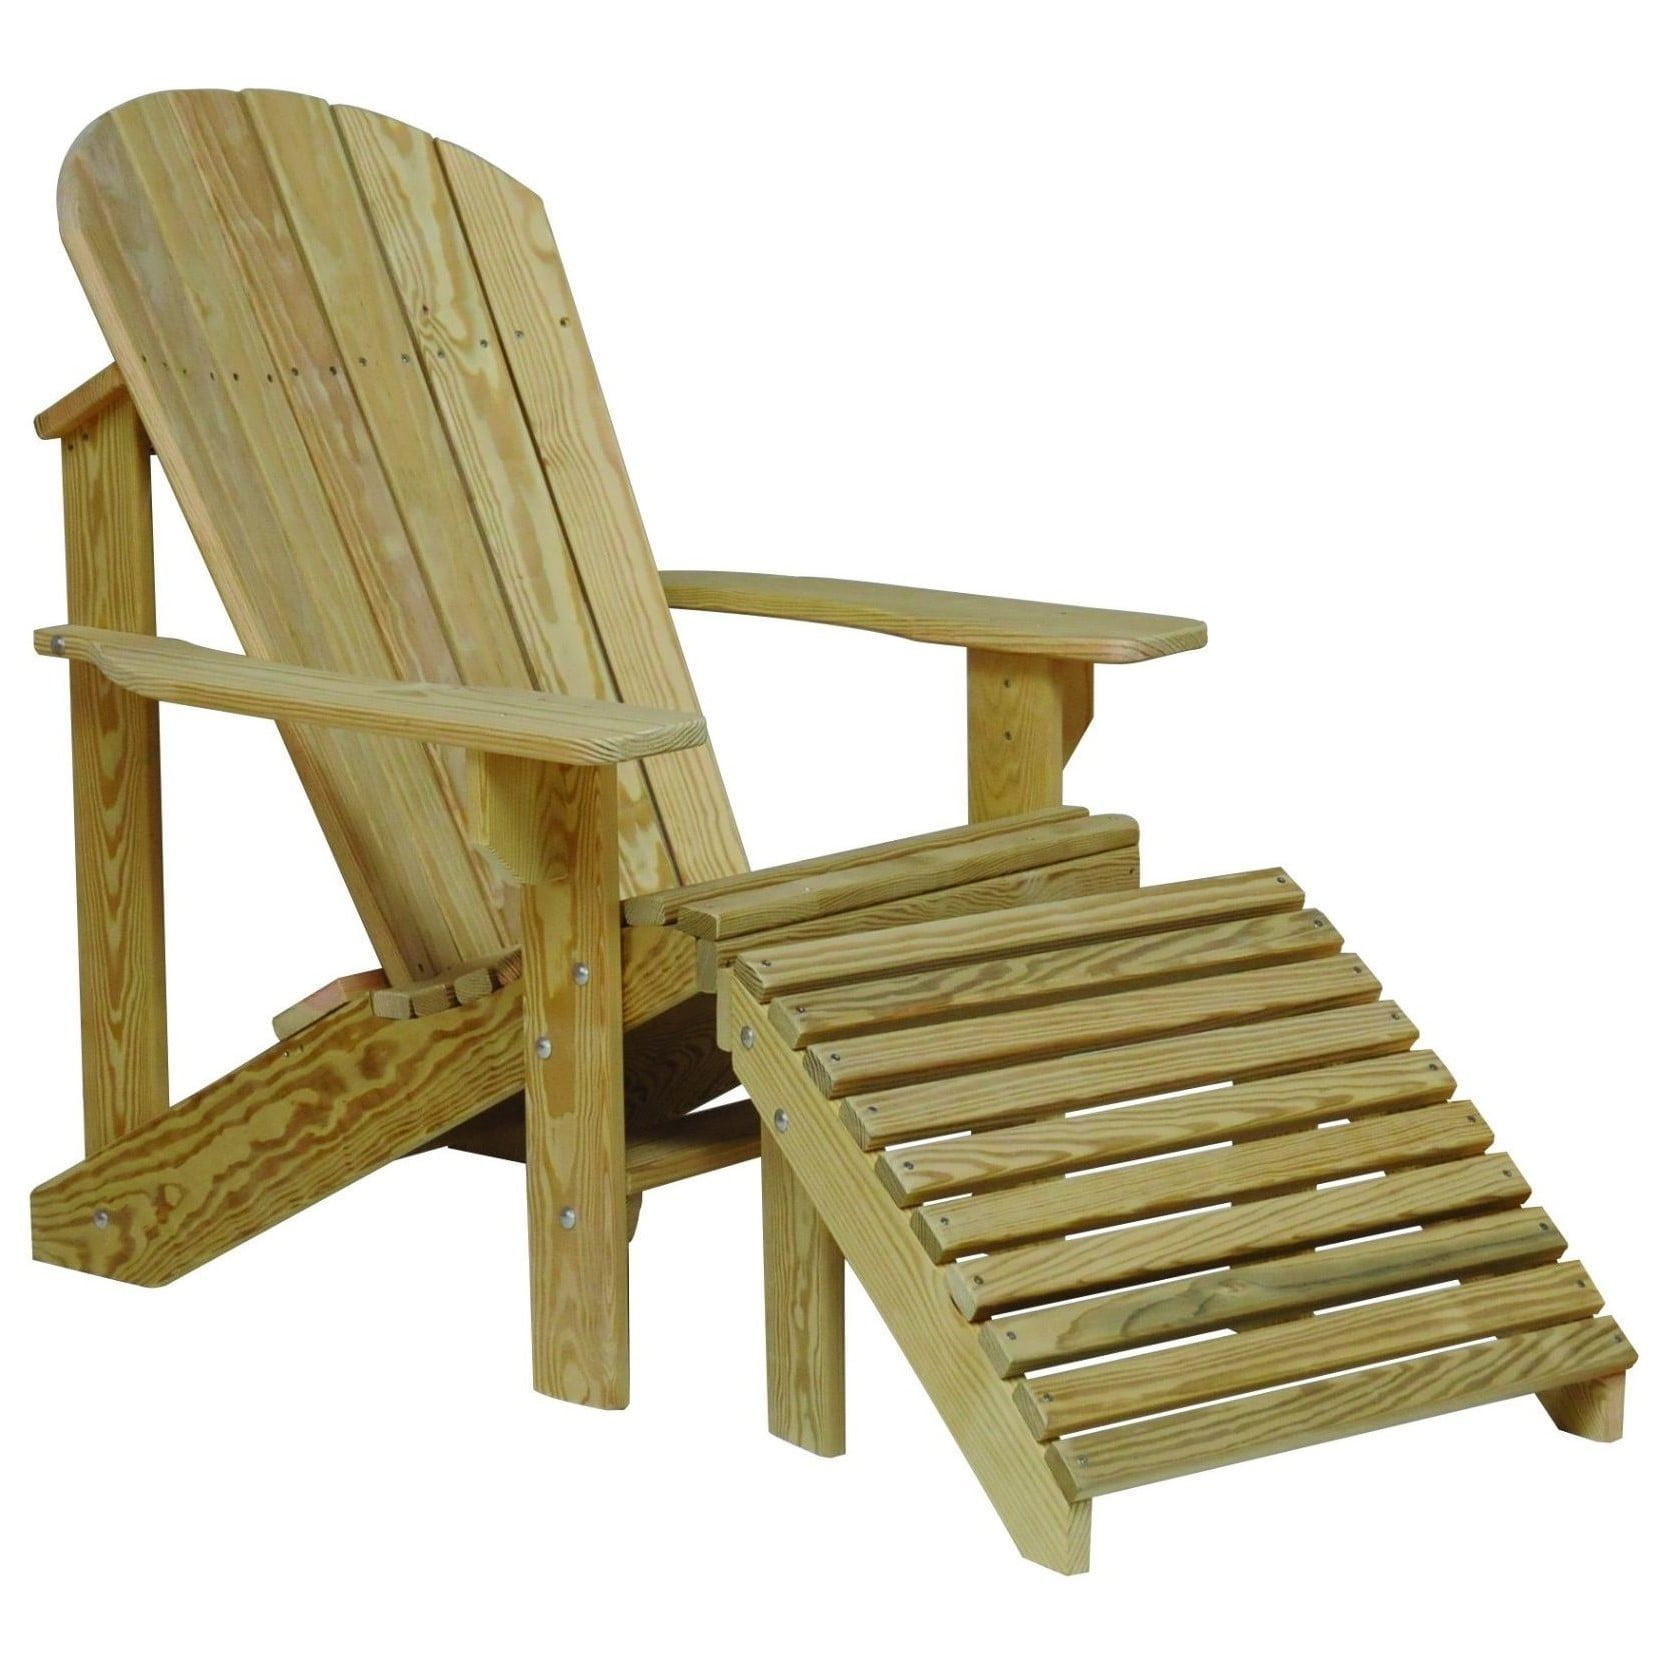 Unfinished Cypress Wood Adirondack Chair with Footrest